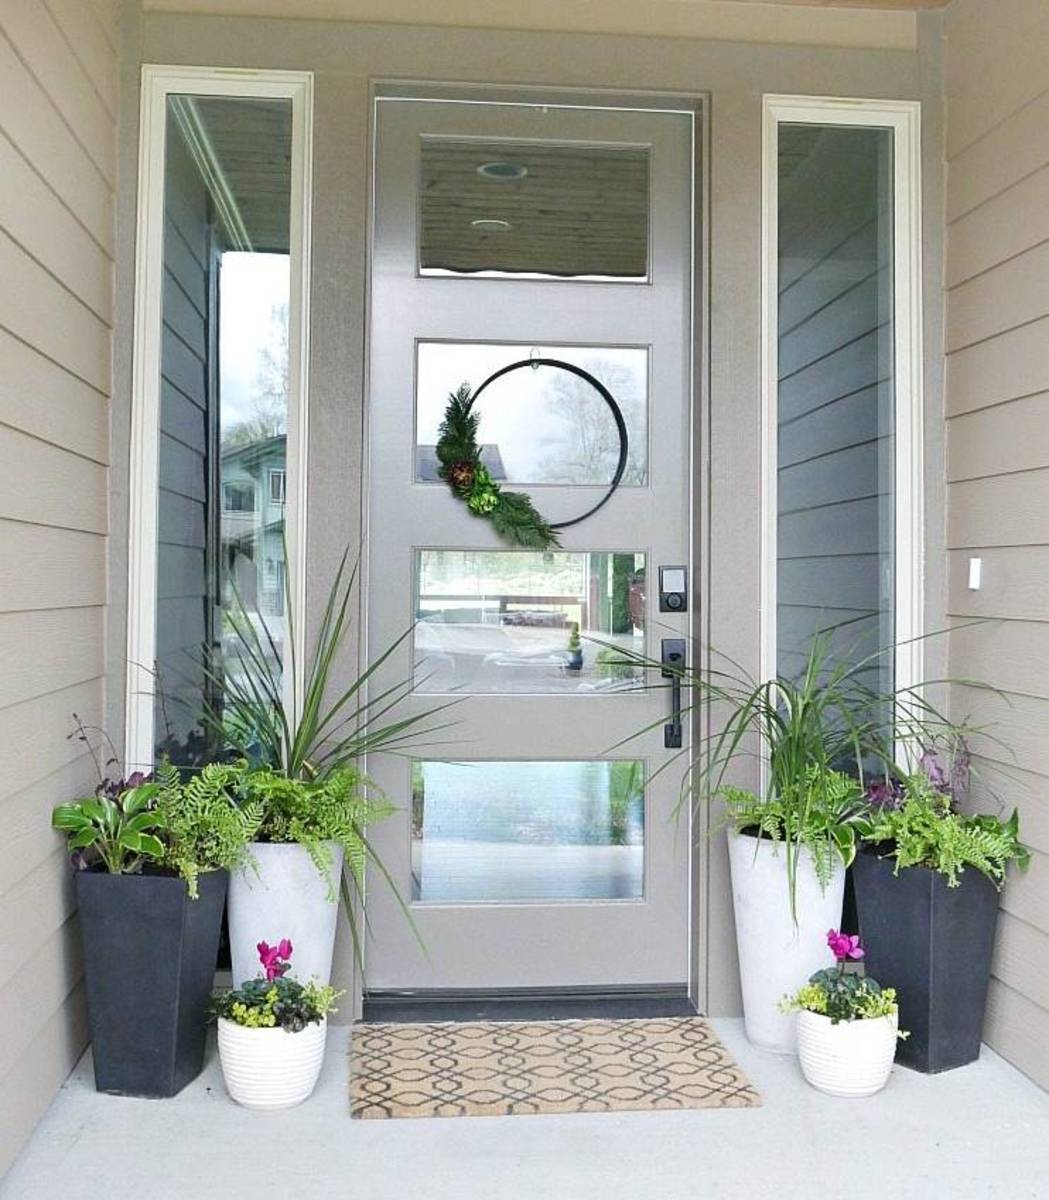 Here is how it looks beautiful, so much better. The planters and the greenery really stands out on the front door.